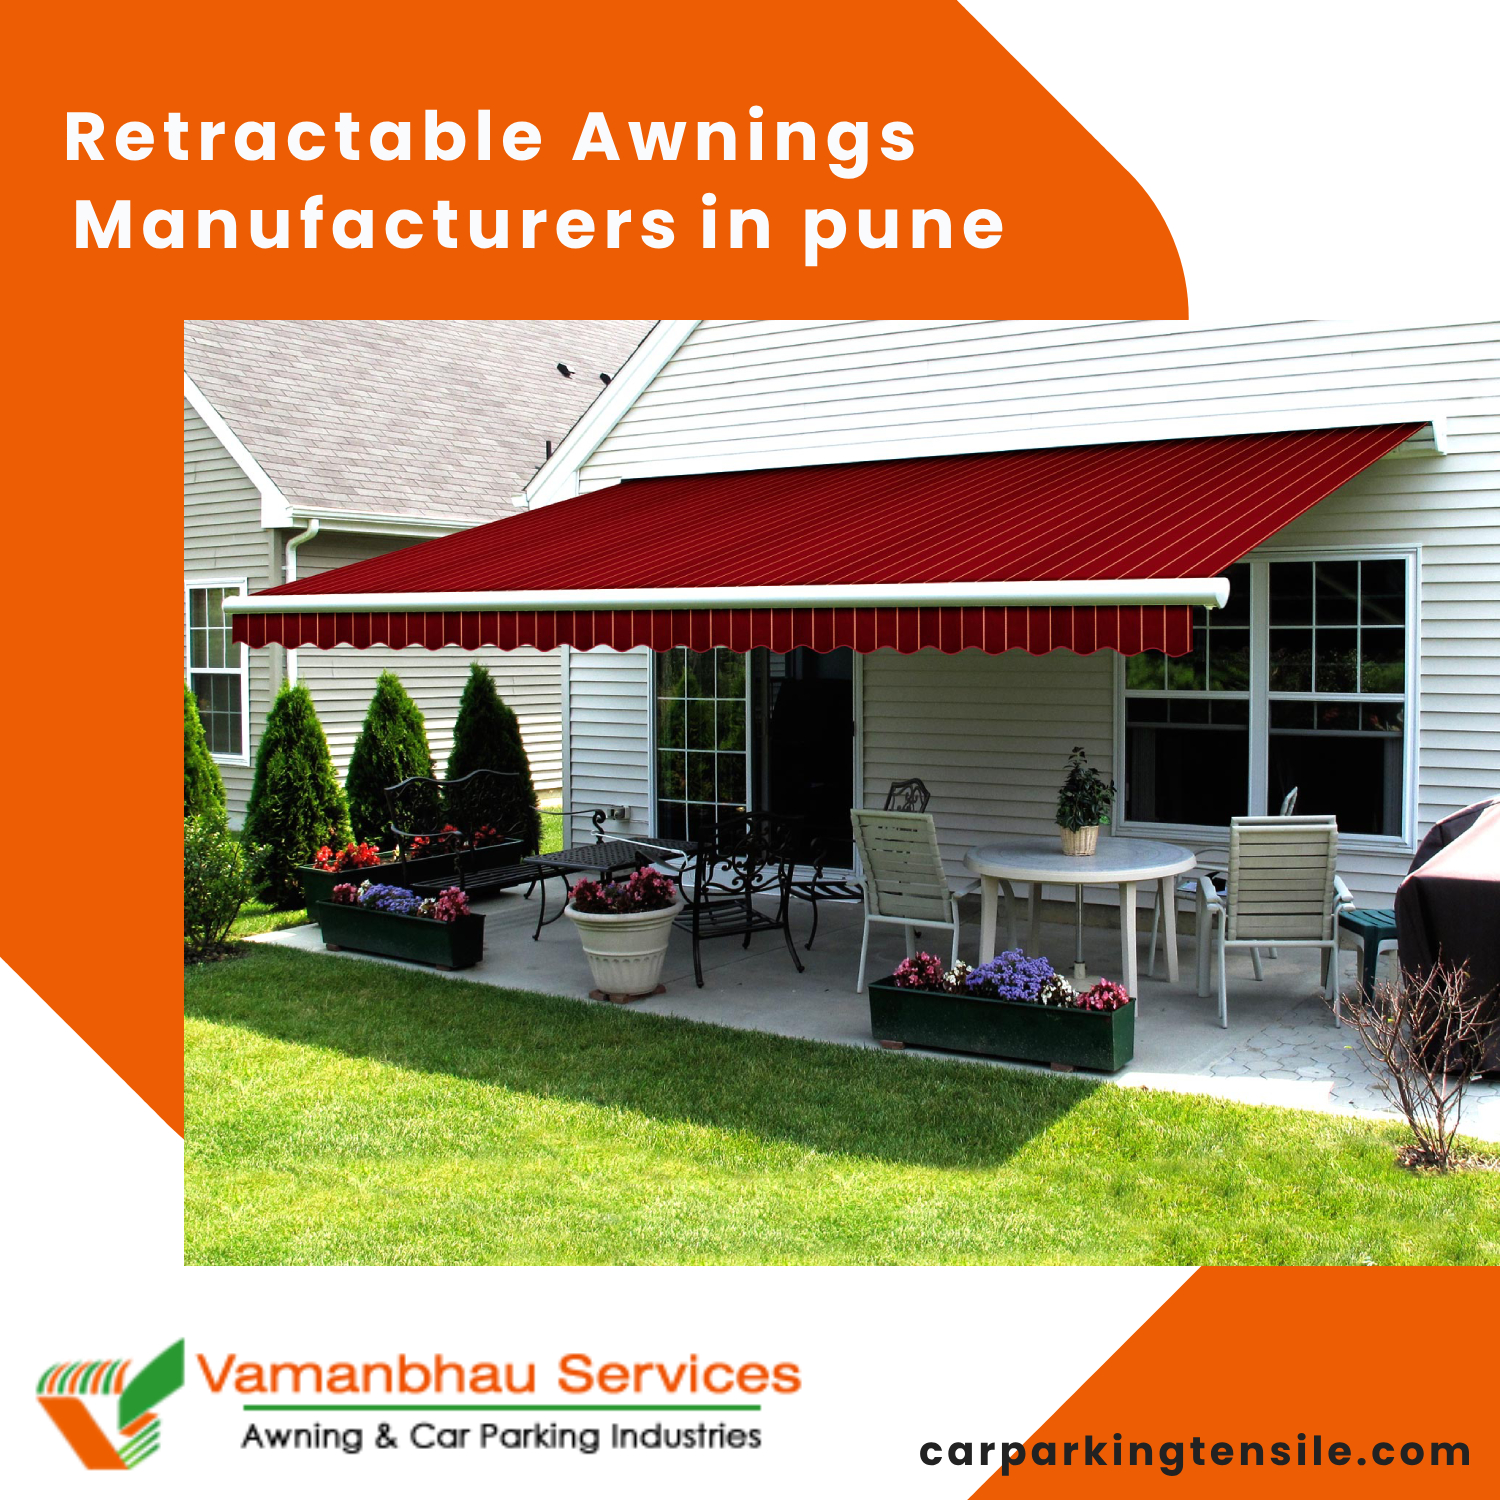 Retractable Awnings Manufacturers in Pune